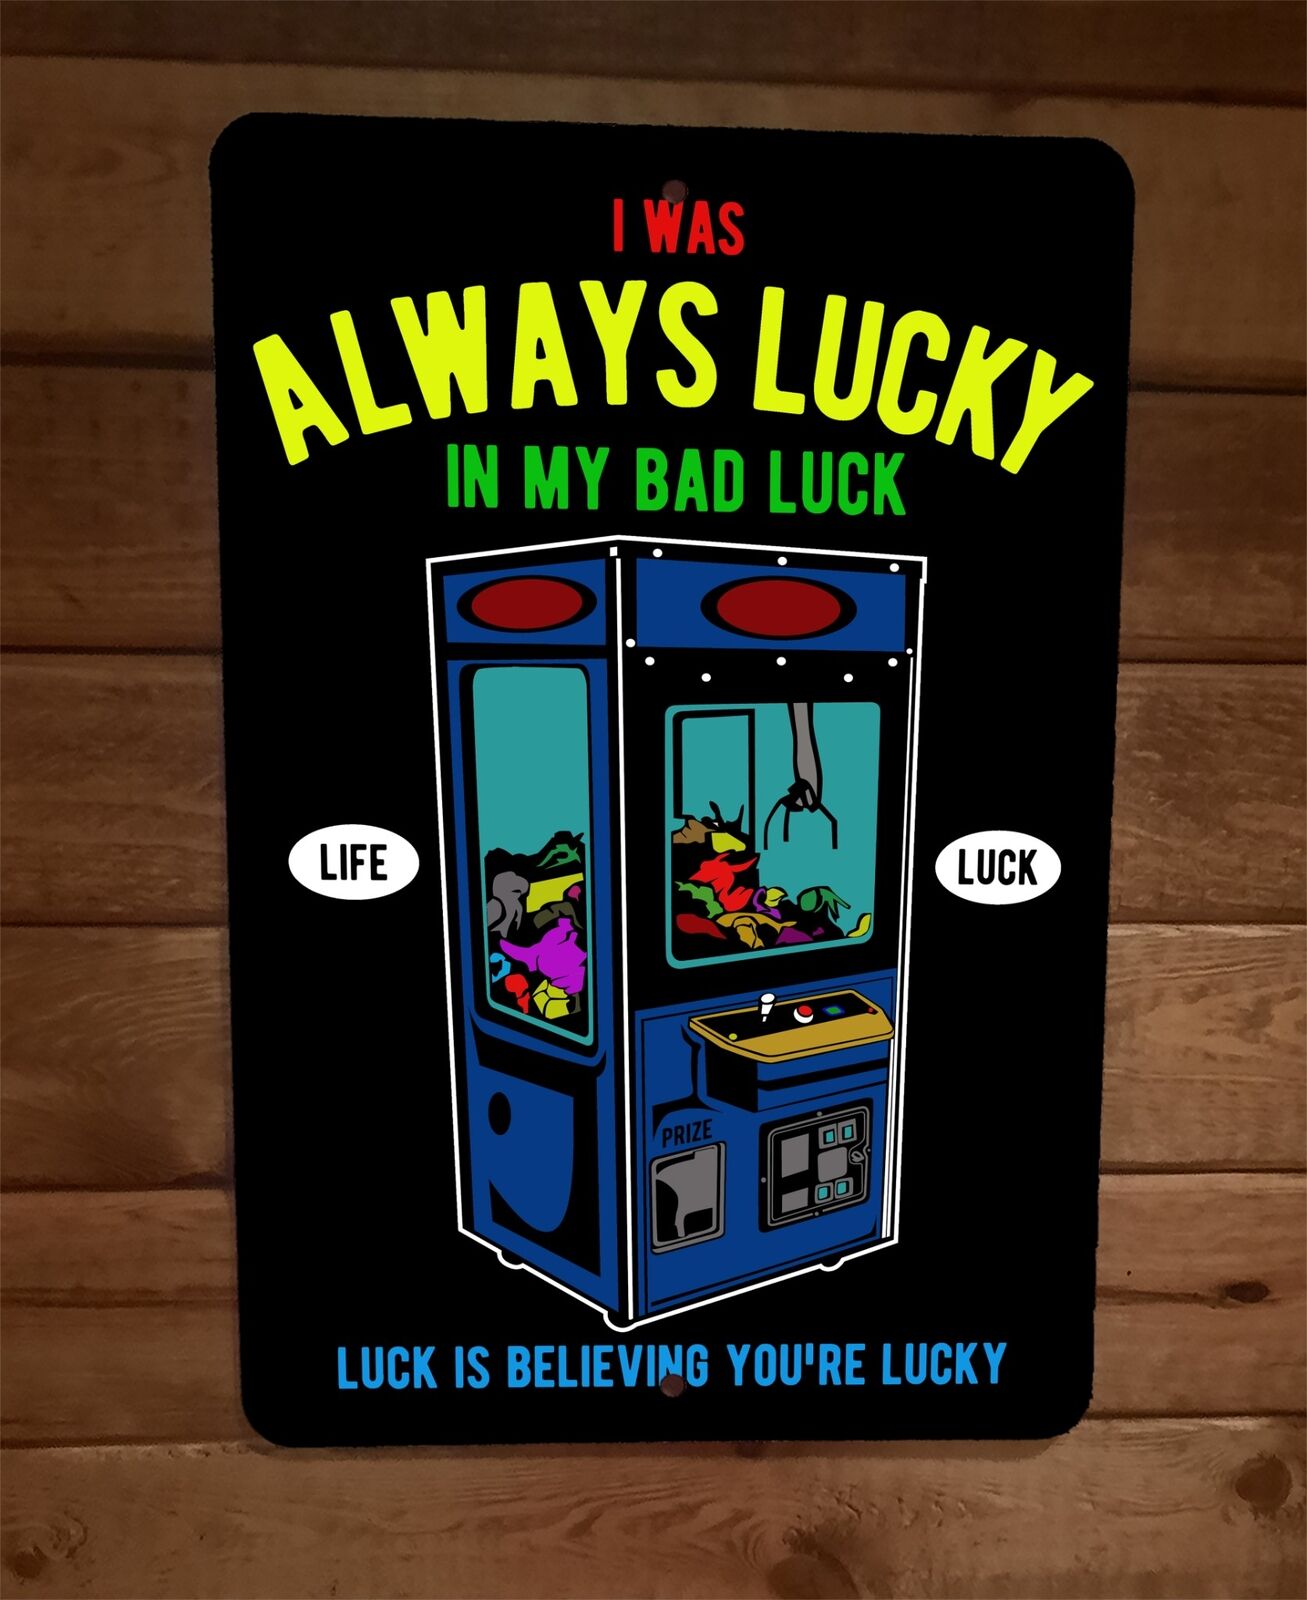 I Was Always Lucky in My Bad Luck 8x12 Metal Wall Sign